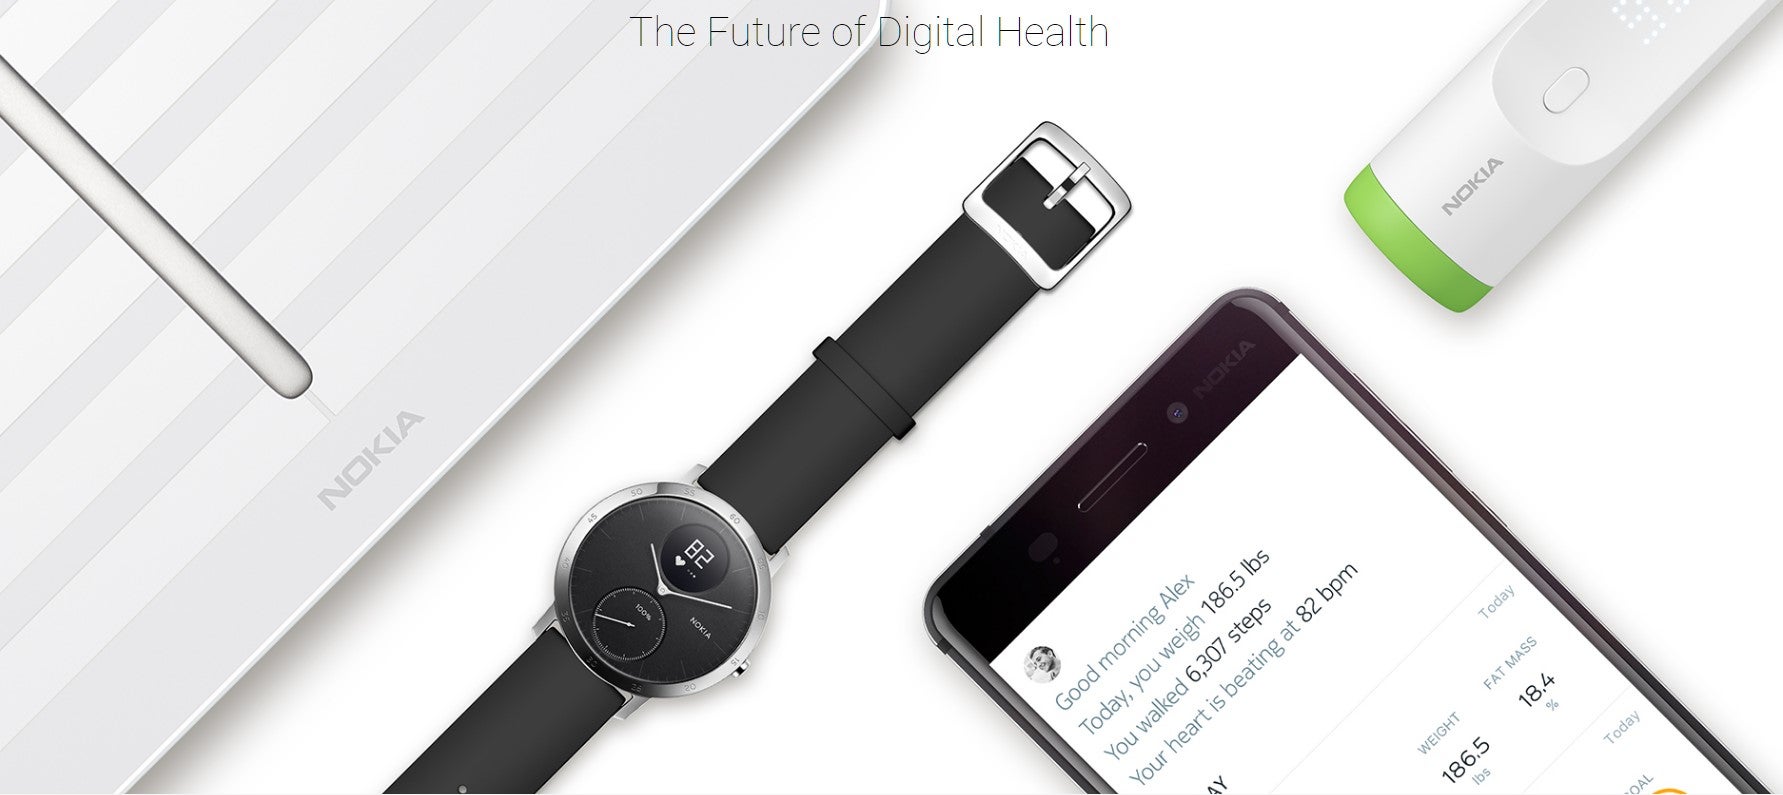 RIP, Withings, all your smart scales and fitness bands will be rebranded as Nokia